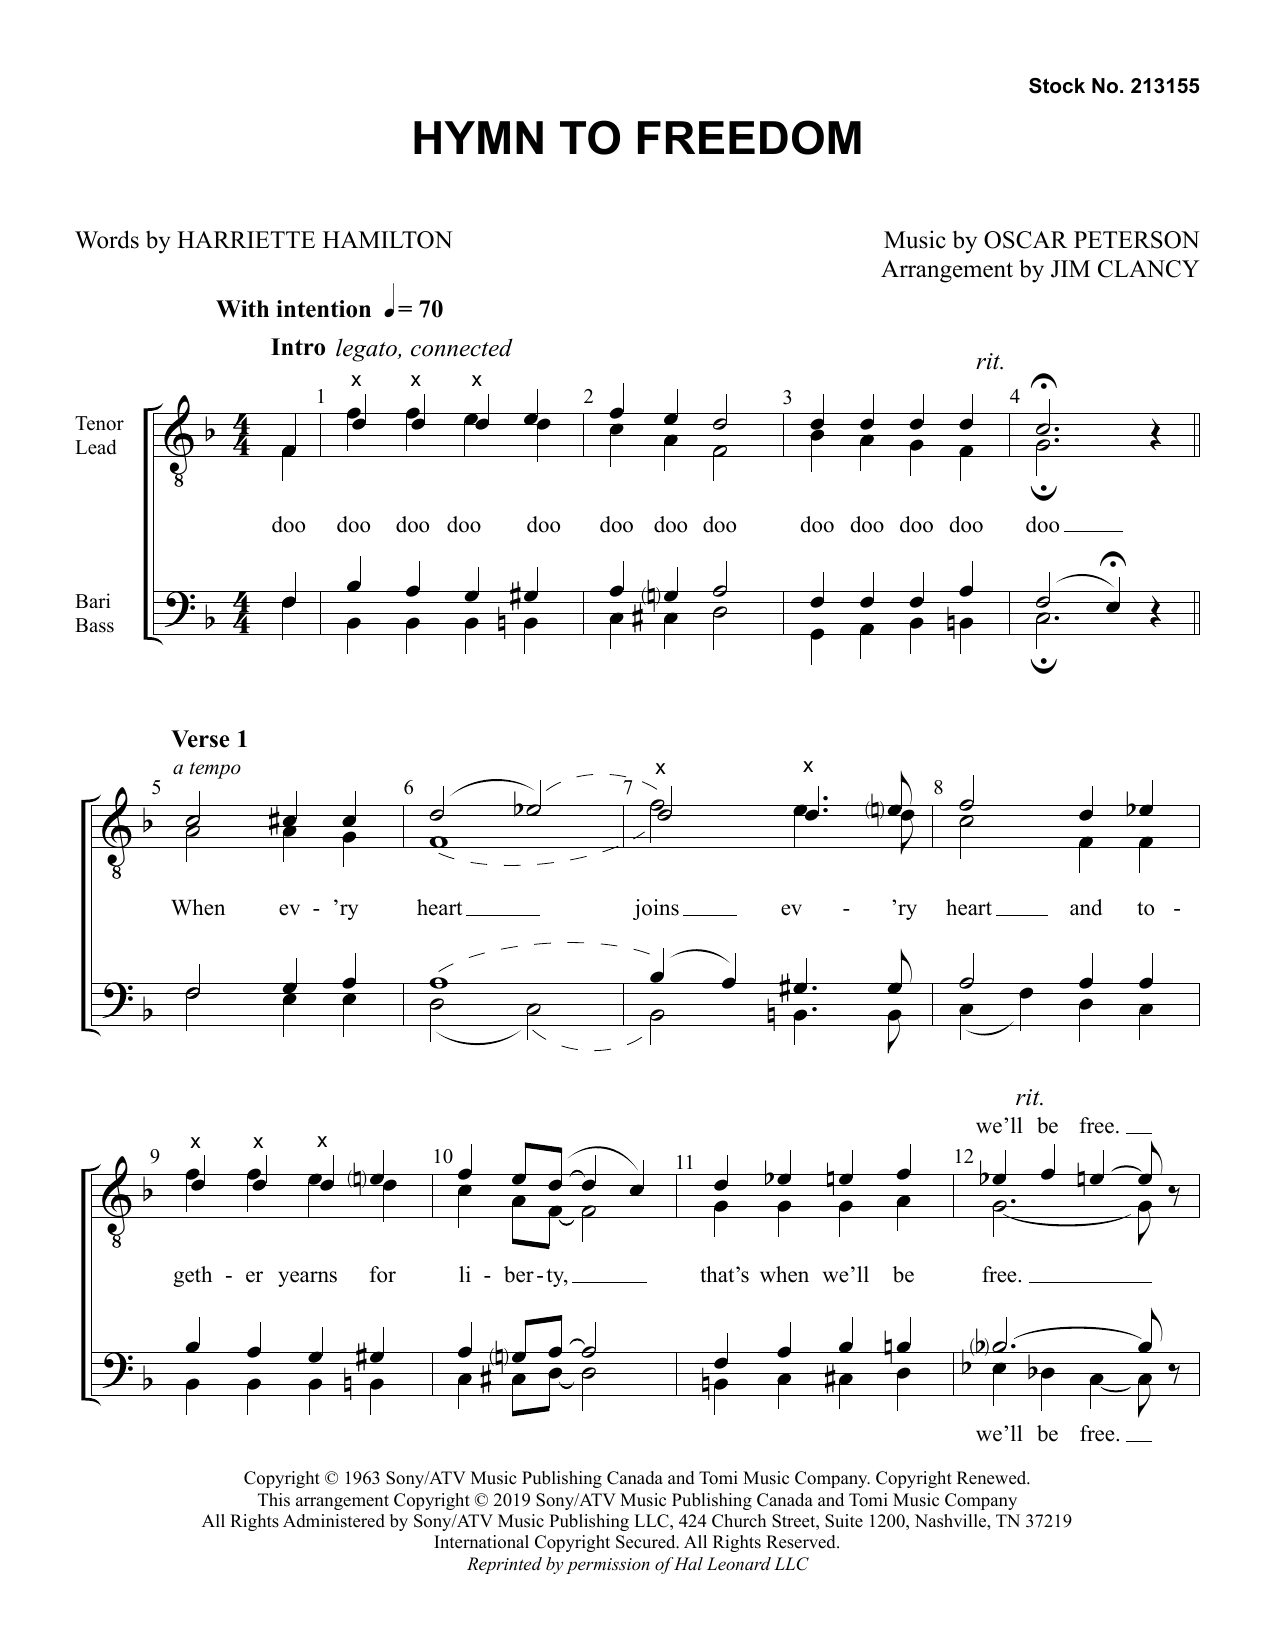 Download Oscar Peterson Hymn to Freedom (arr. Jim Clancy) Sheet Music